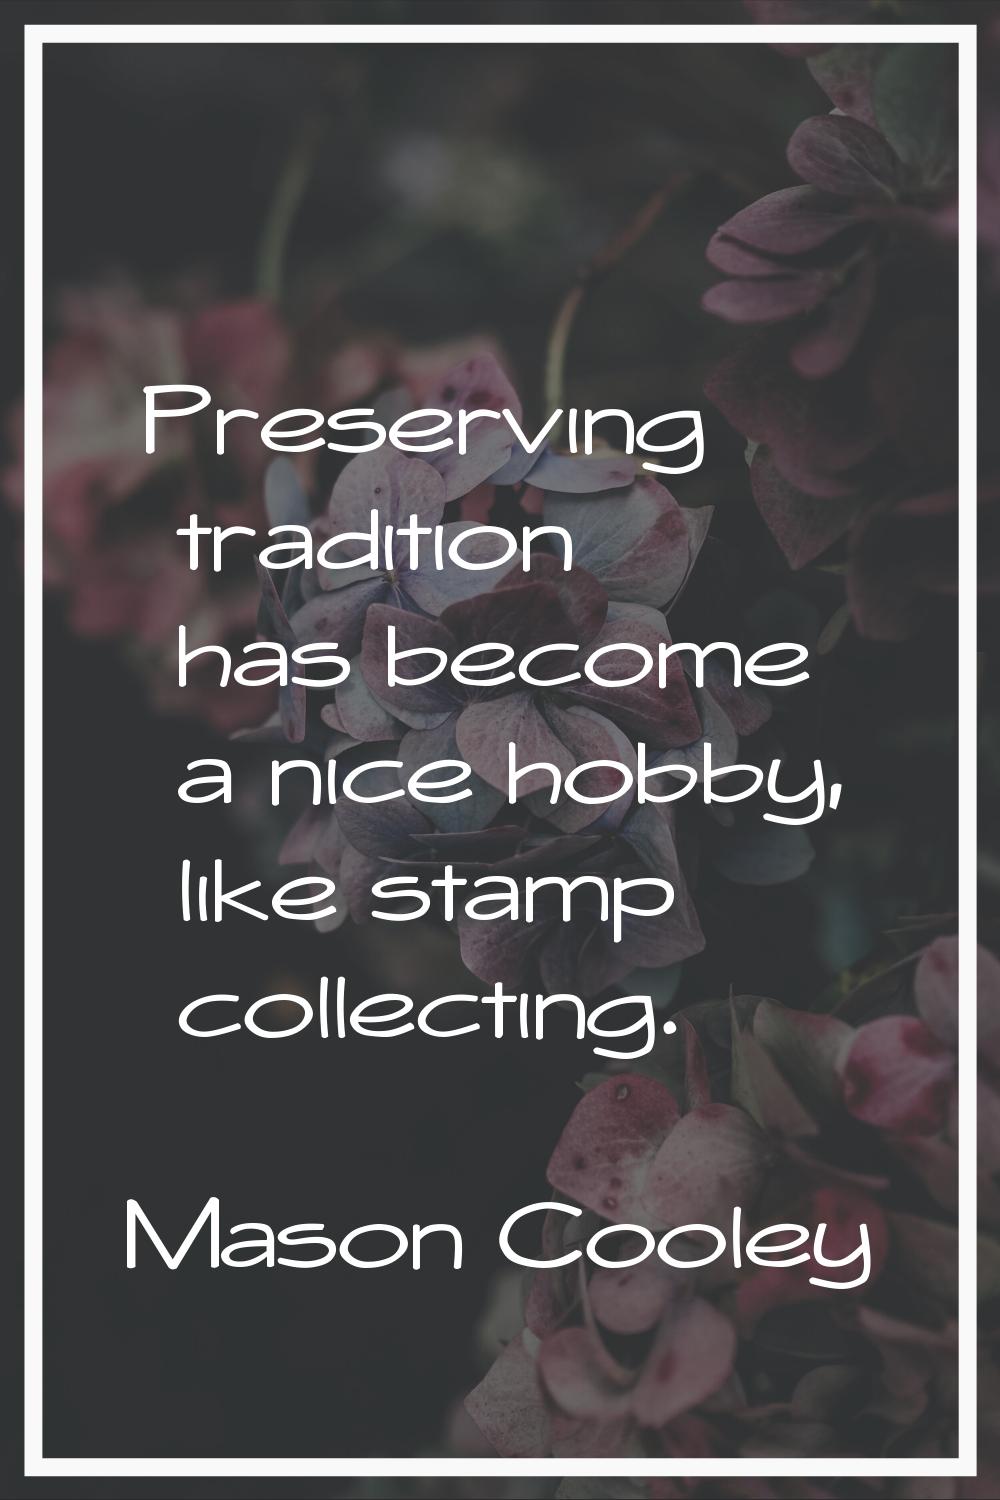 Preserving tradition has become a nice hobby, like stamp collecting.